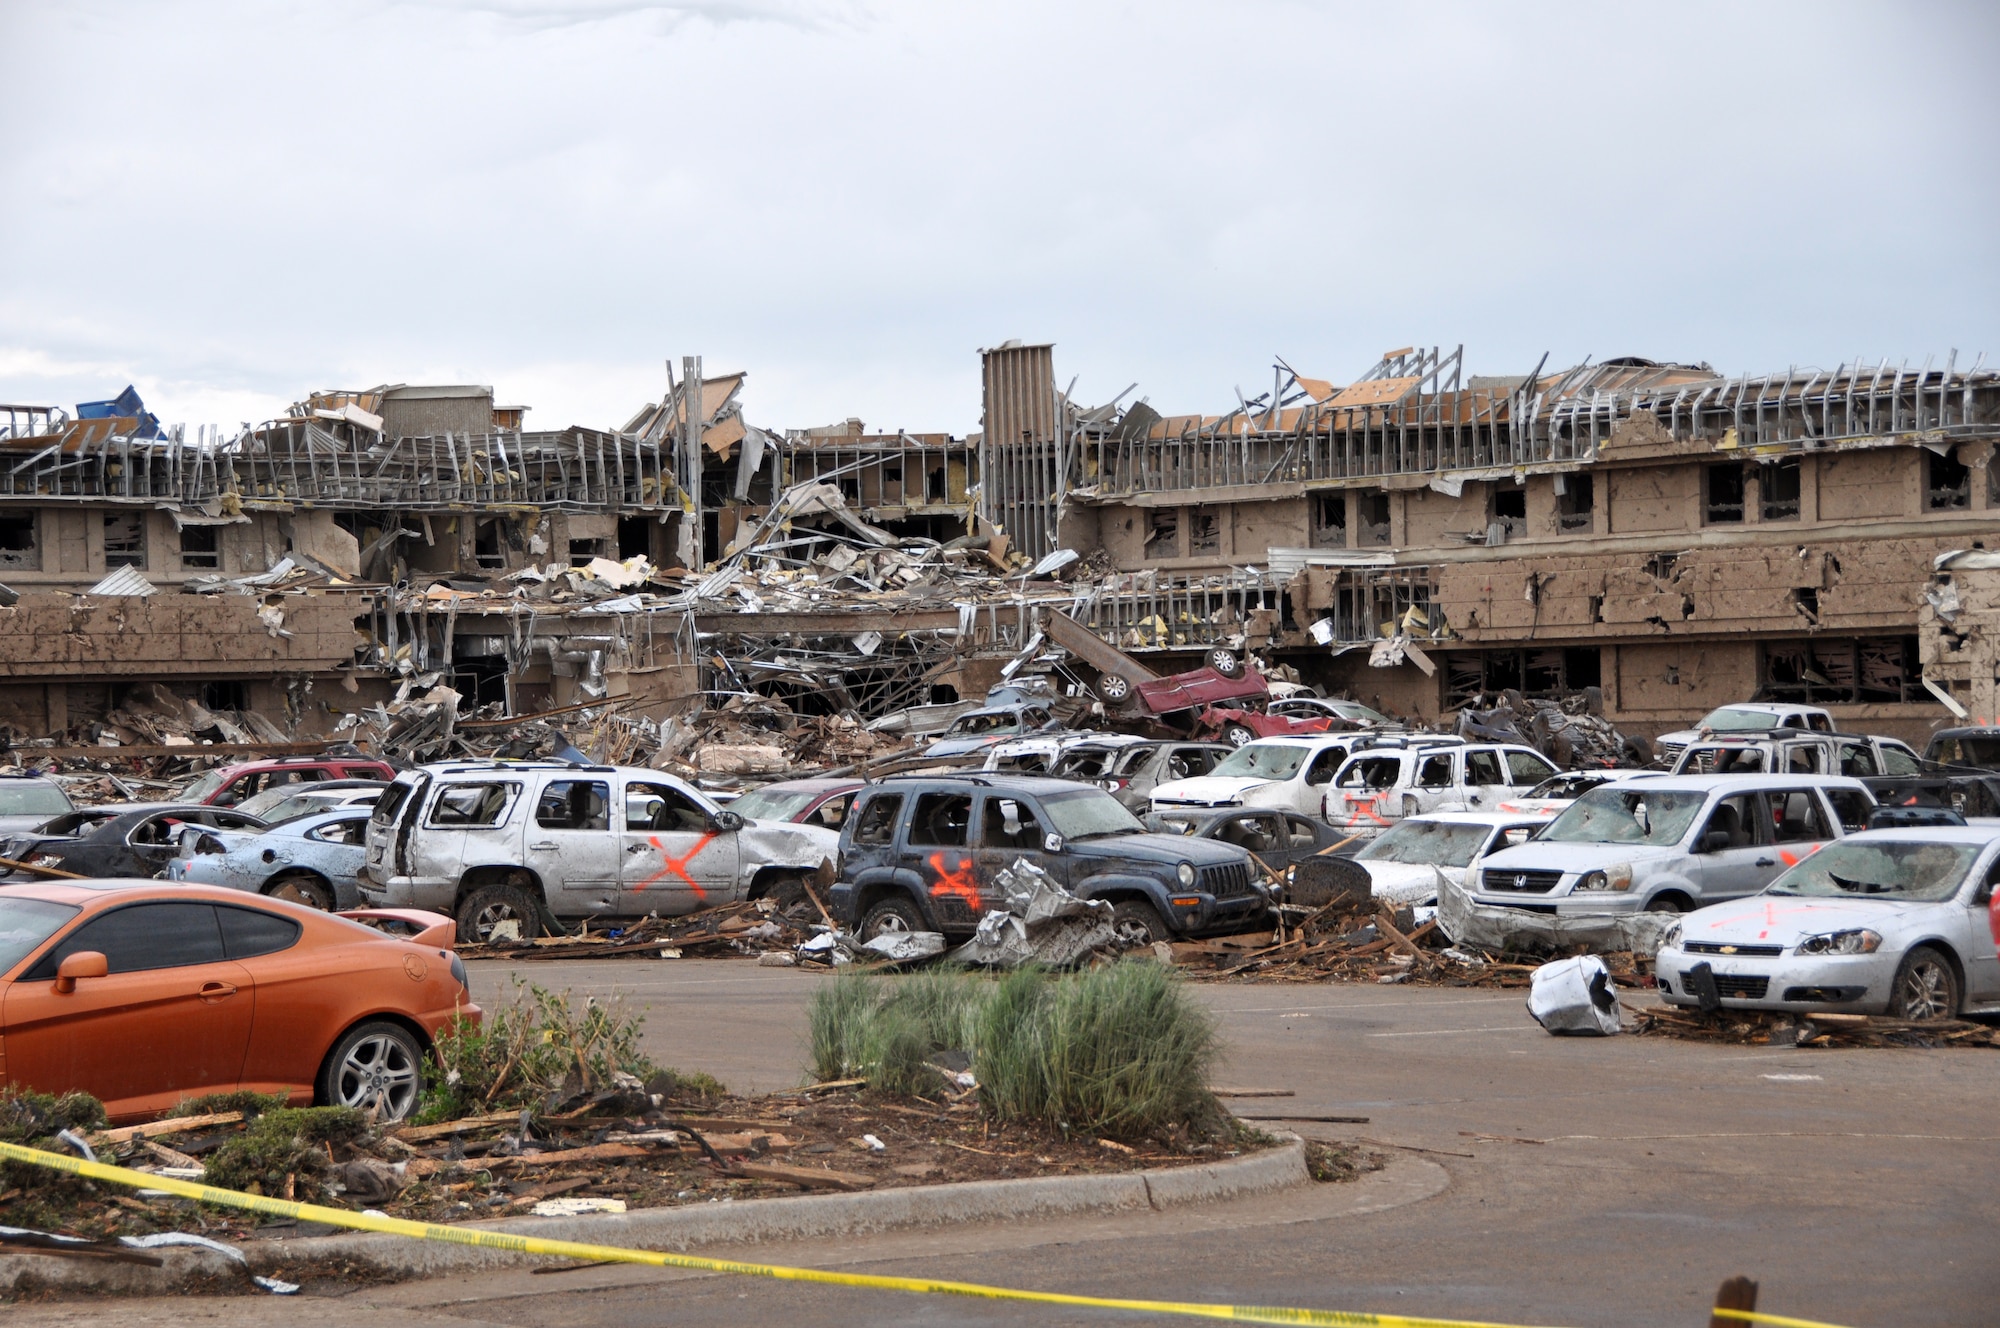 The Moore Medical Center – Norman Regional Hospital in Moore Okla., is ripped apart by the massive tornado on May 20, 2013.  The hospital was directly in the path of the 1.3 mile wide tornado that hit Moore in the late afternoon.  There were no casualties reported.  Cars flipped over and piled on top of one another along with cars that were cleared away by first responders fill the parking lot.  The Orange X spray painted on the cars indicates that the vehicle was checked and cleared of any victims.  (U.S. Air Force photo by Senior Airman Mark Hybers)